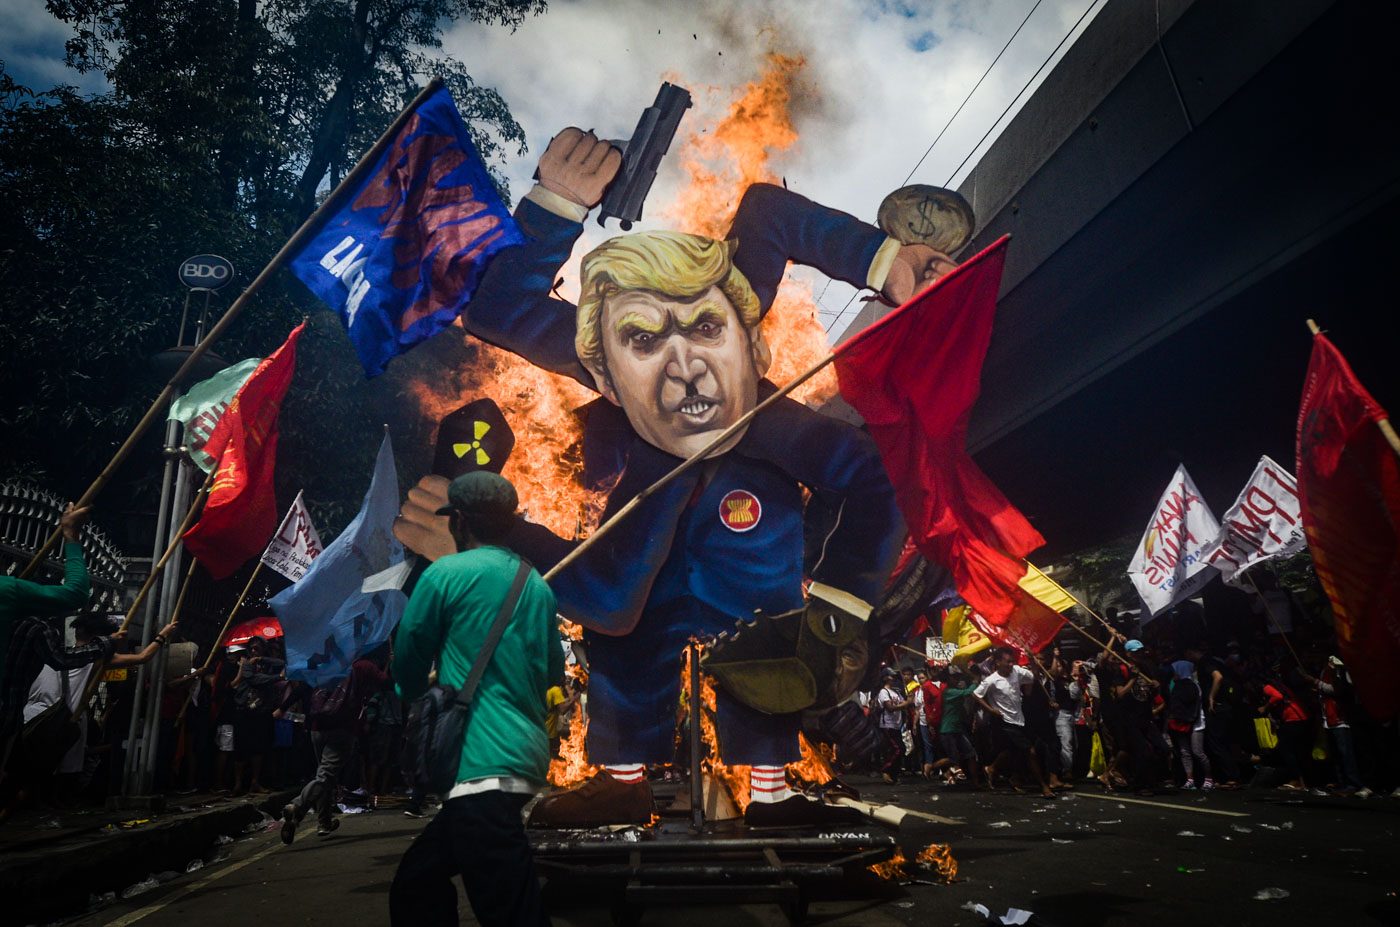 ON FIRE. Before dispersing, protesters burn an effigy of the US president that featured four hands of Trump shaped into the swastika. 